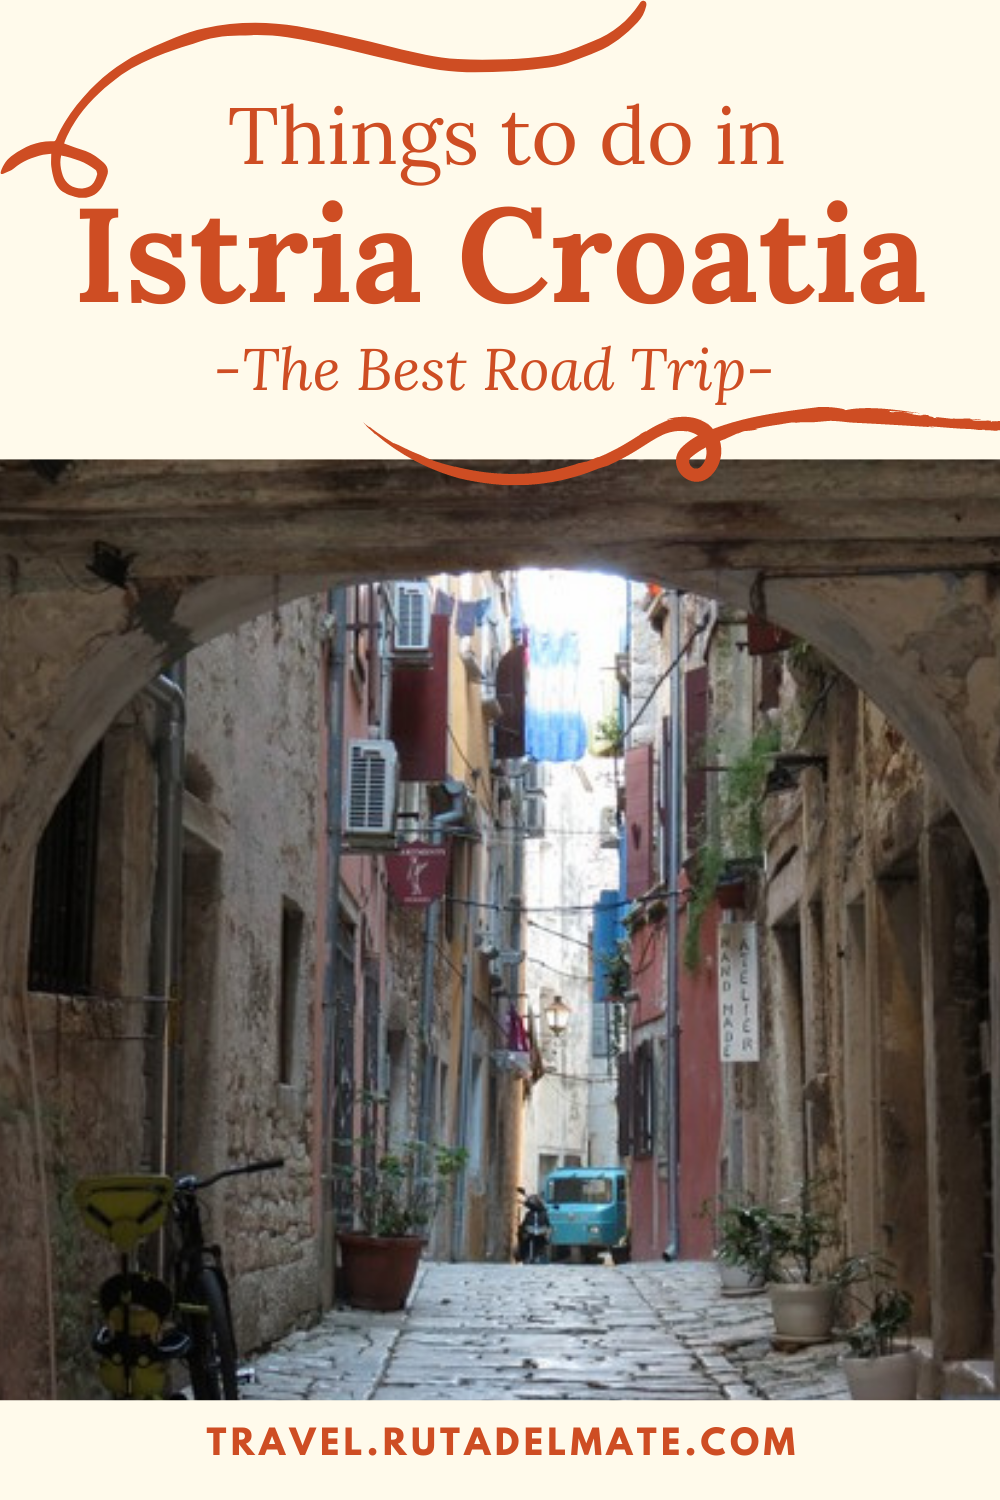 Things to do in Istria